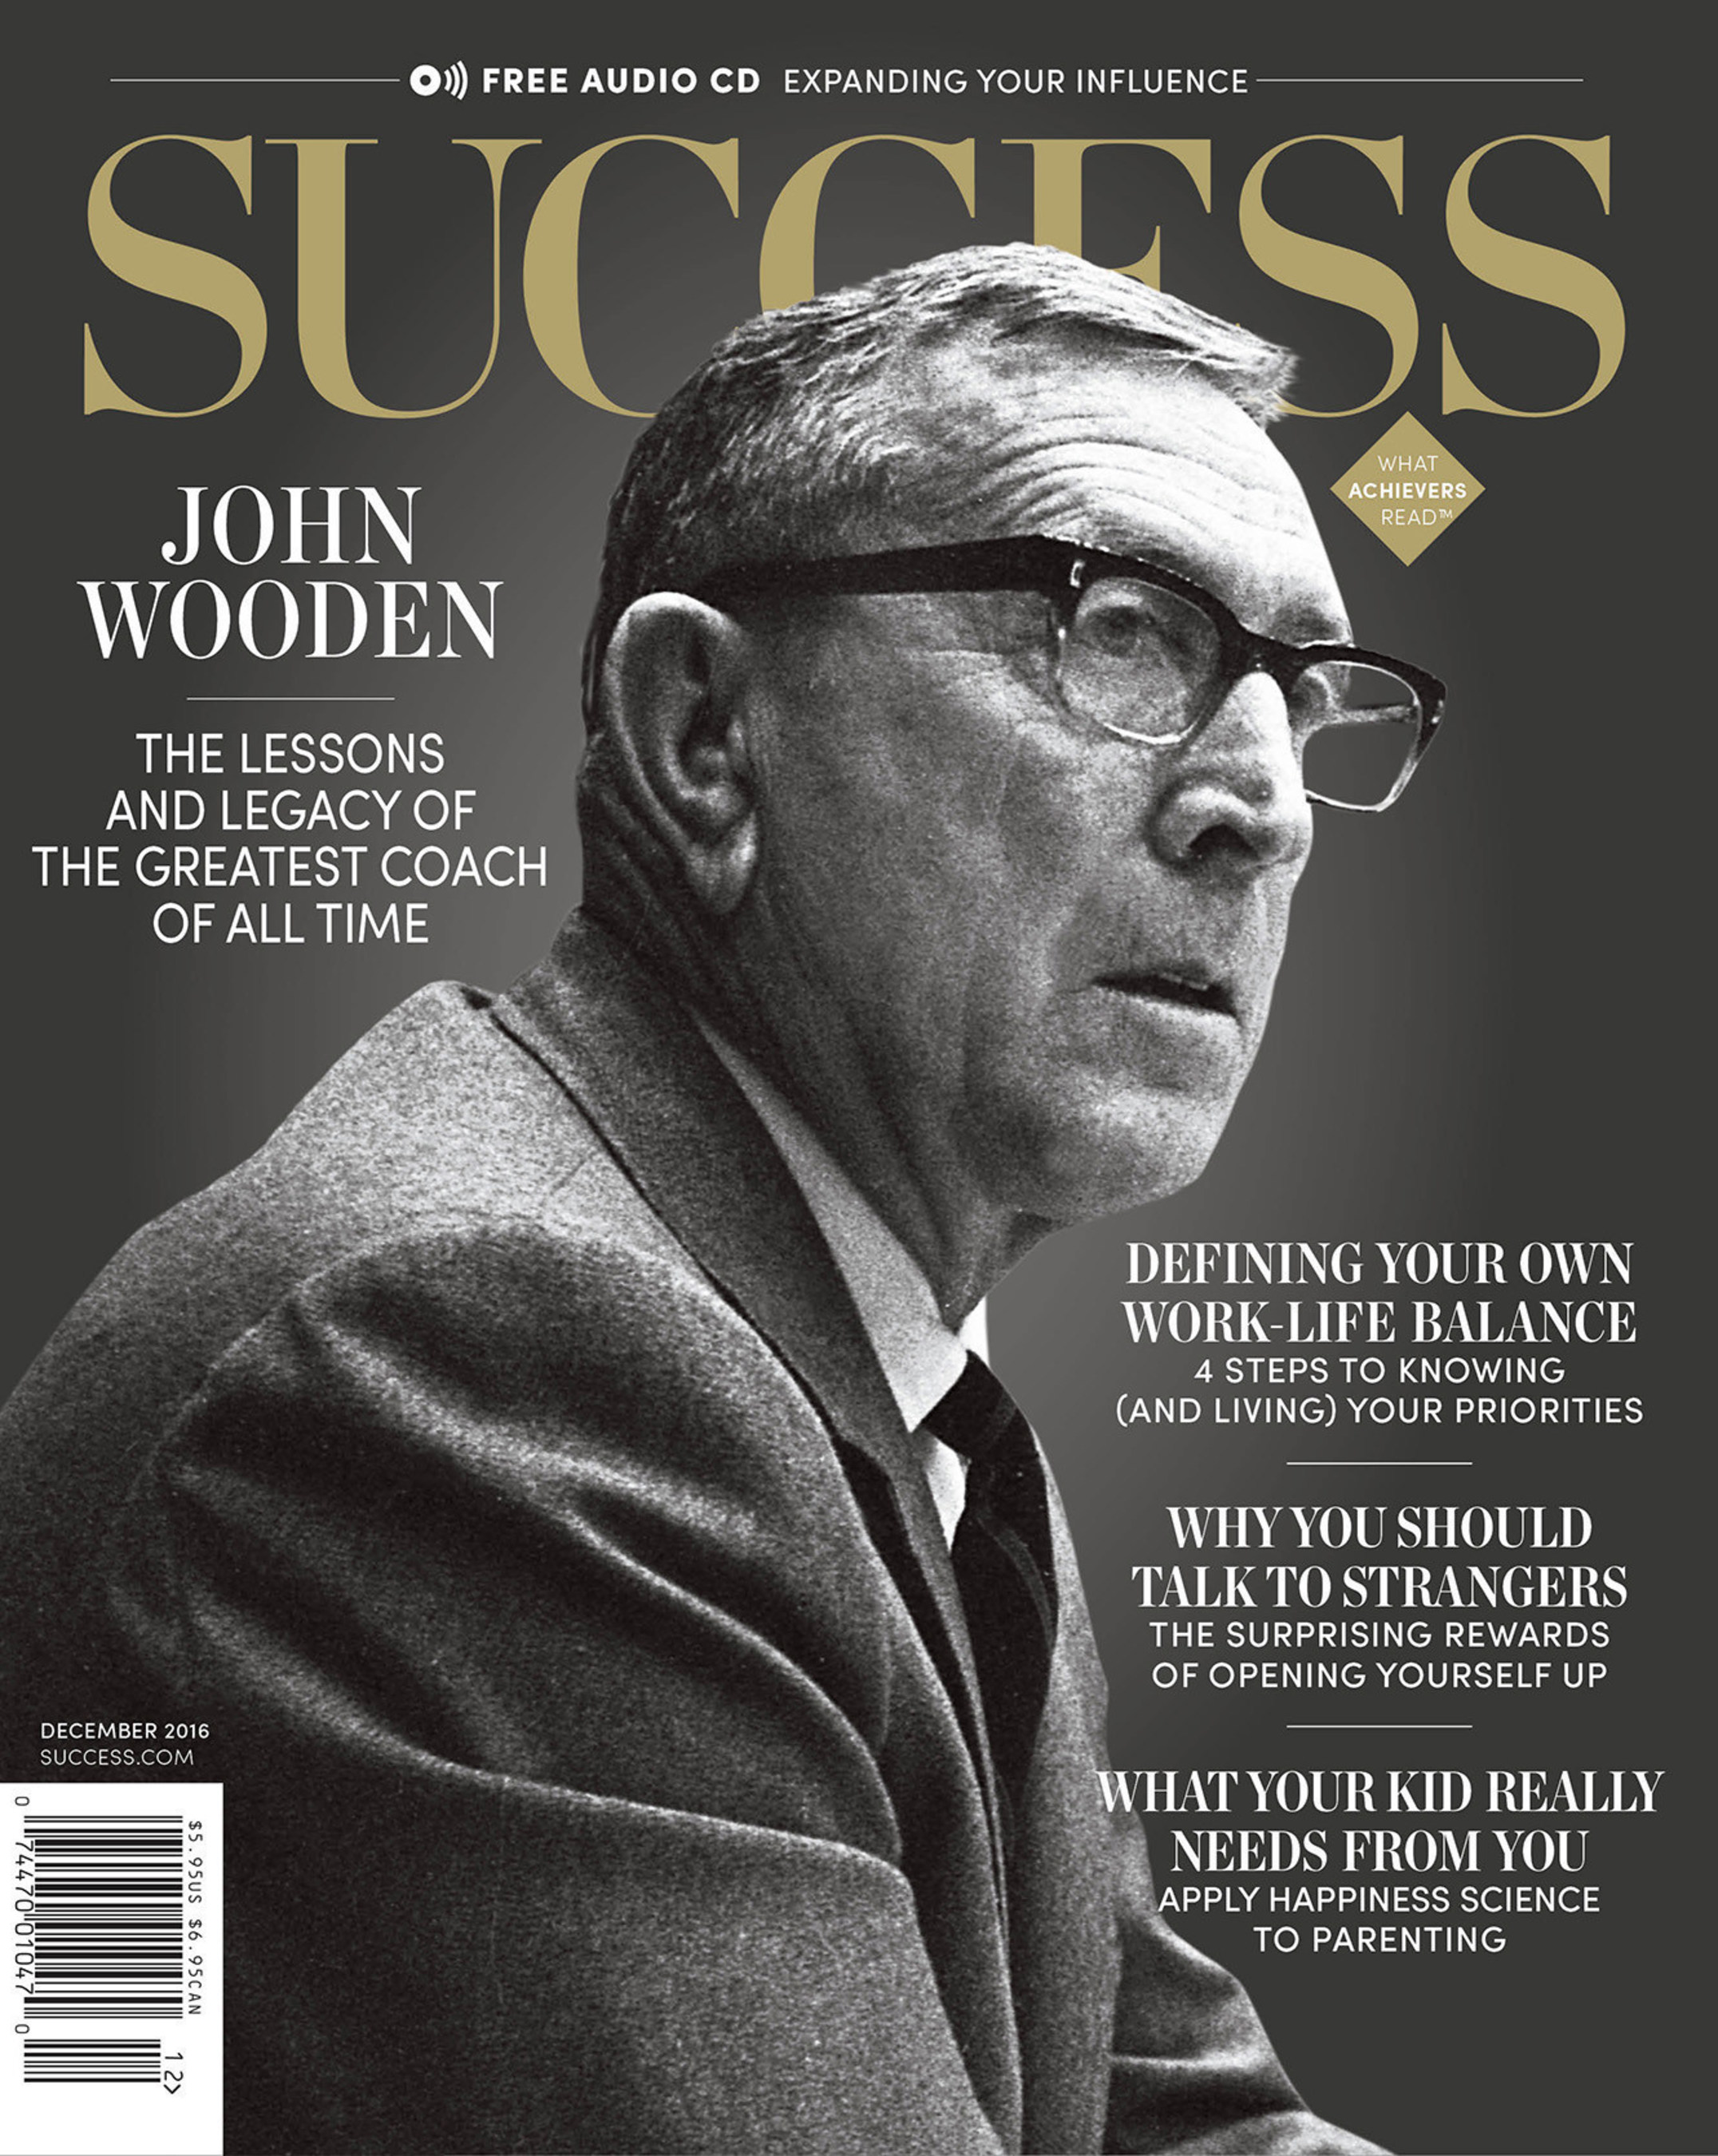 Coach Wooden has impacted the lives of thousands of people--athletes, coaches, entertainers and business people alike. SUCCESS explores how the greatest coach of all time's philosophies still influence people to this day.